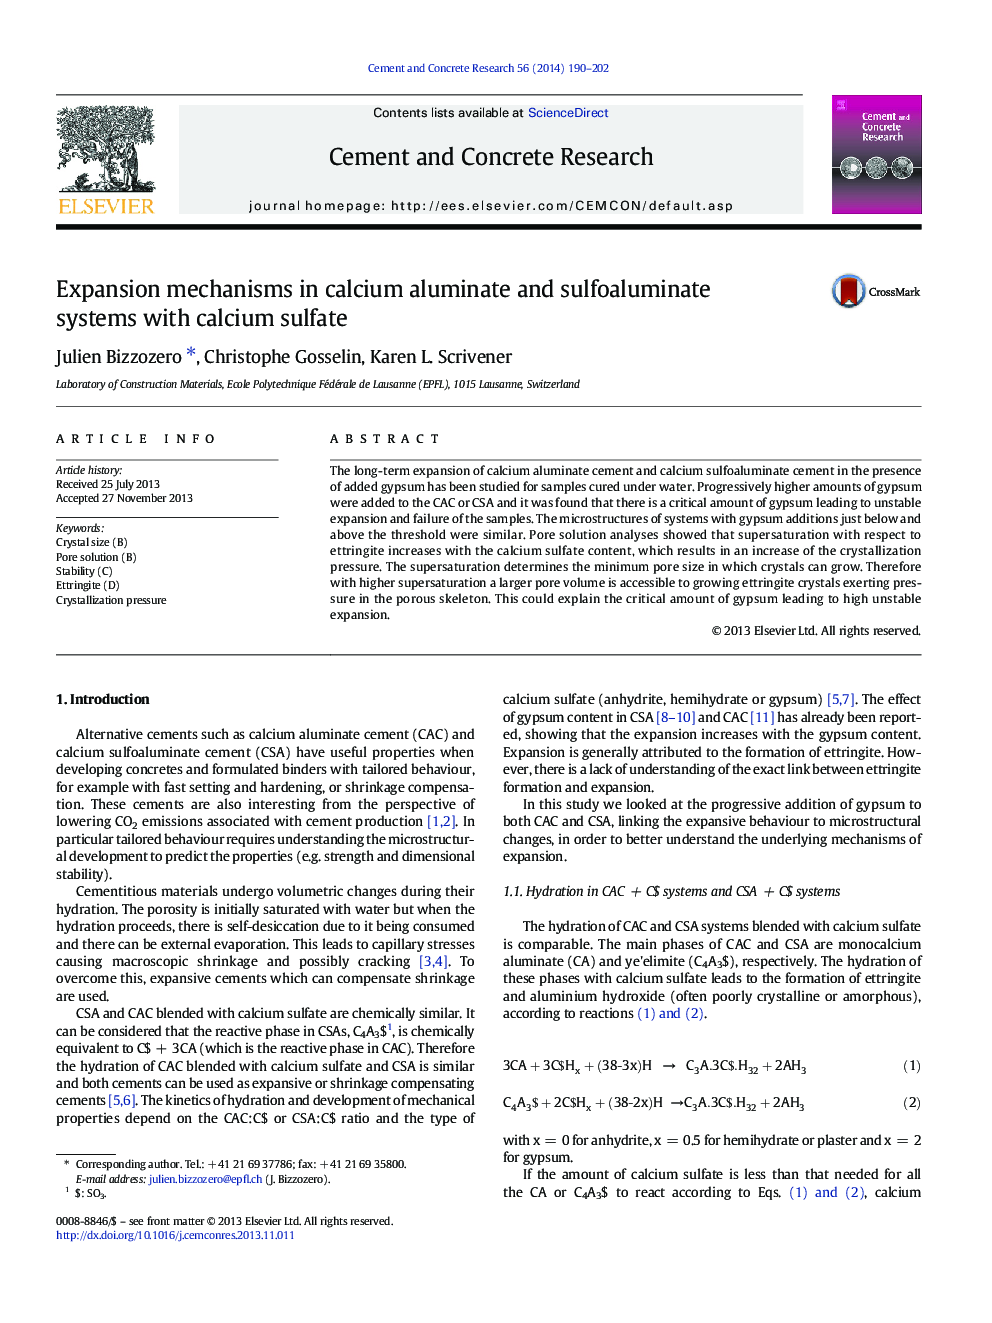 Expansion mechanisms in calcium aluminate and sulfoaluminate systems with calcium sulfate